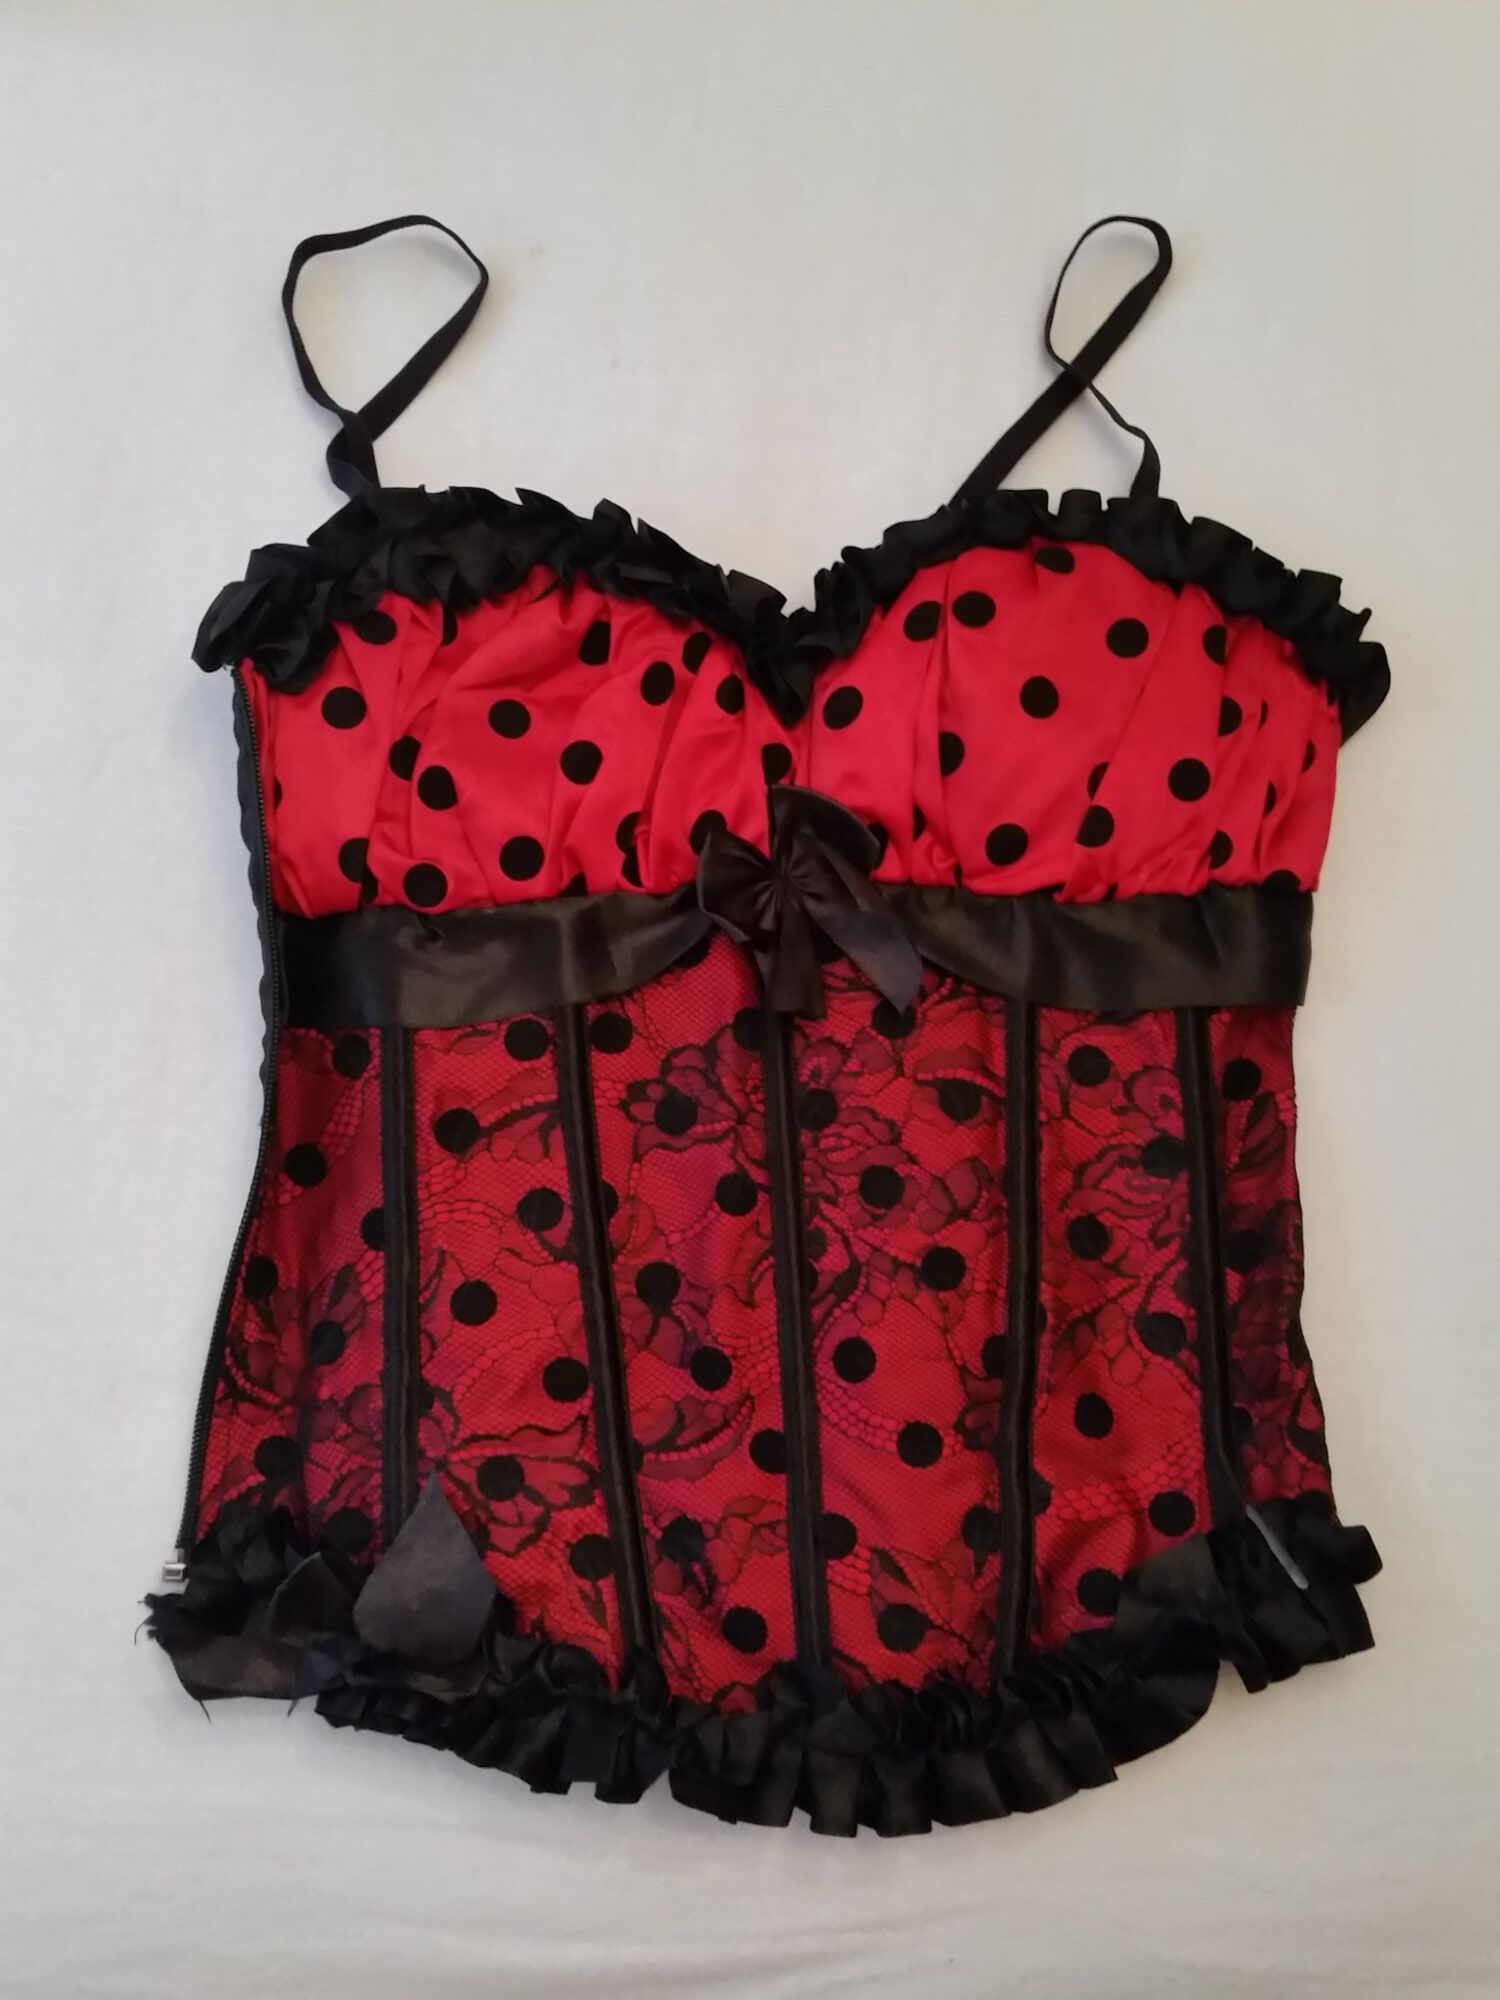 Crosssdressing Collection - Corsets #4